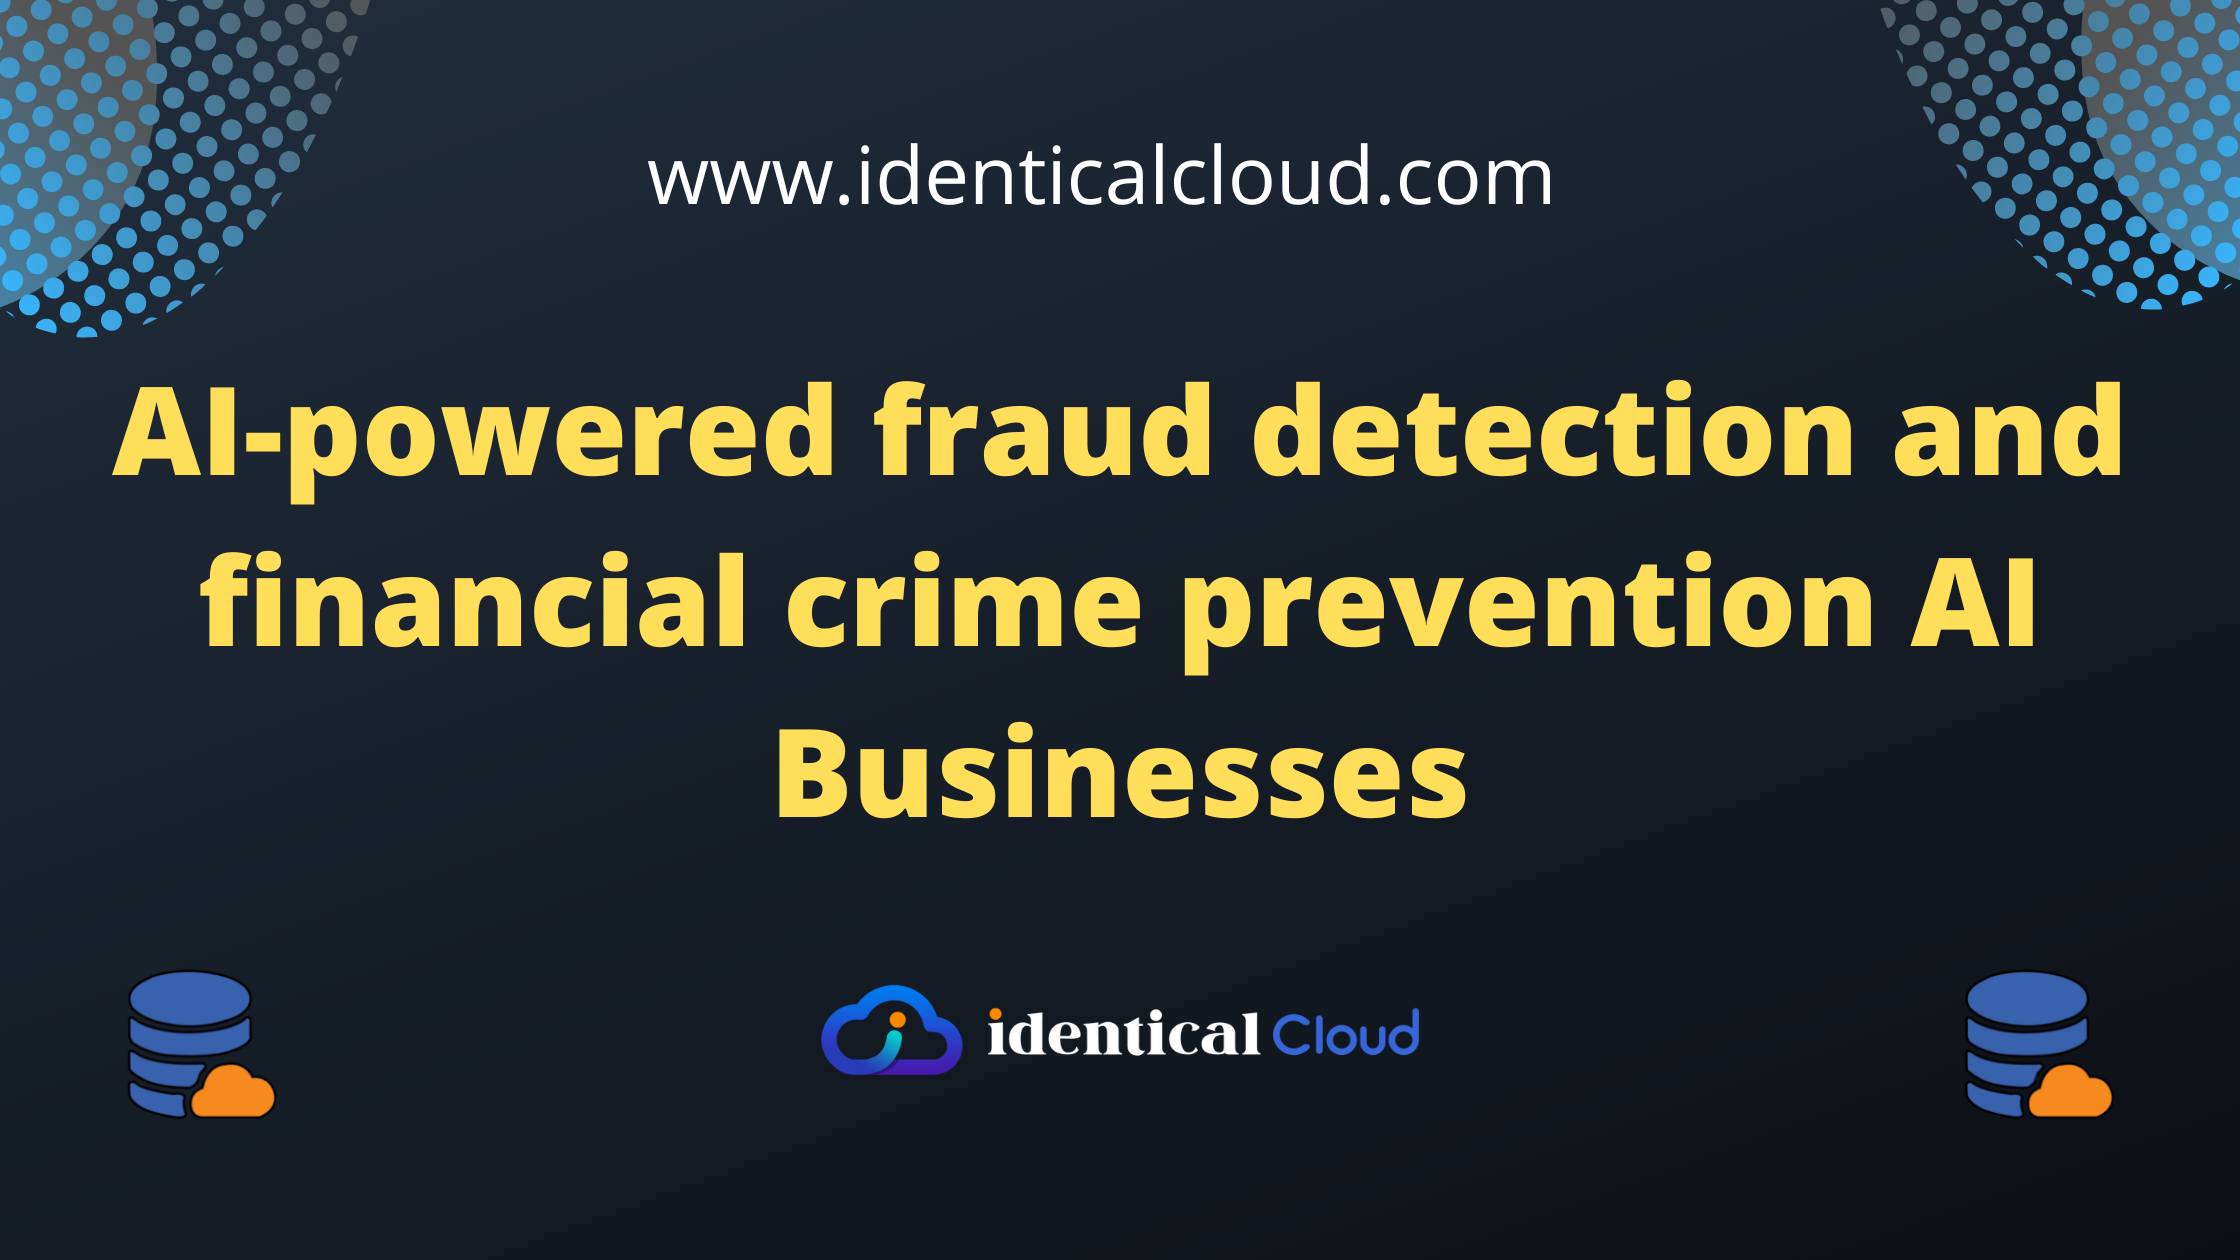 AI-powered fraud detection and financial crime prevention AI Businesses